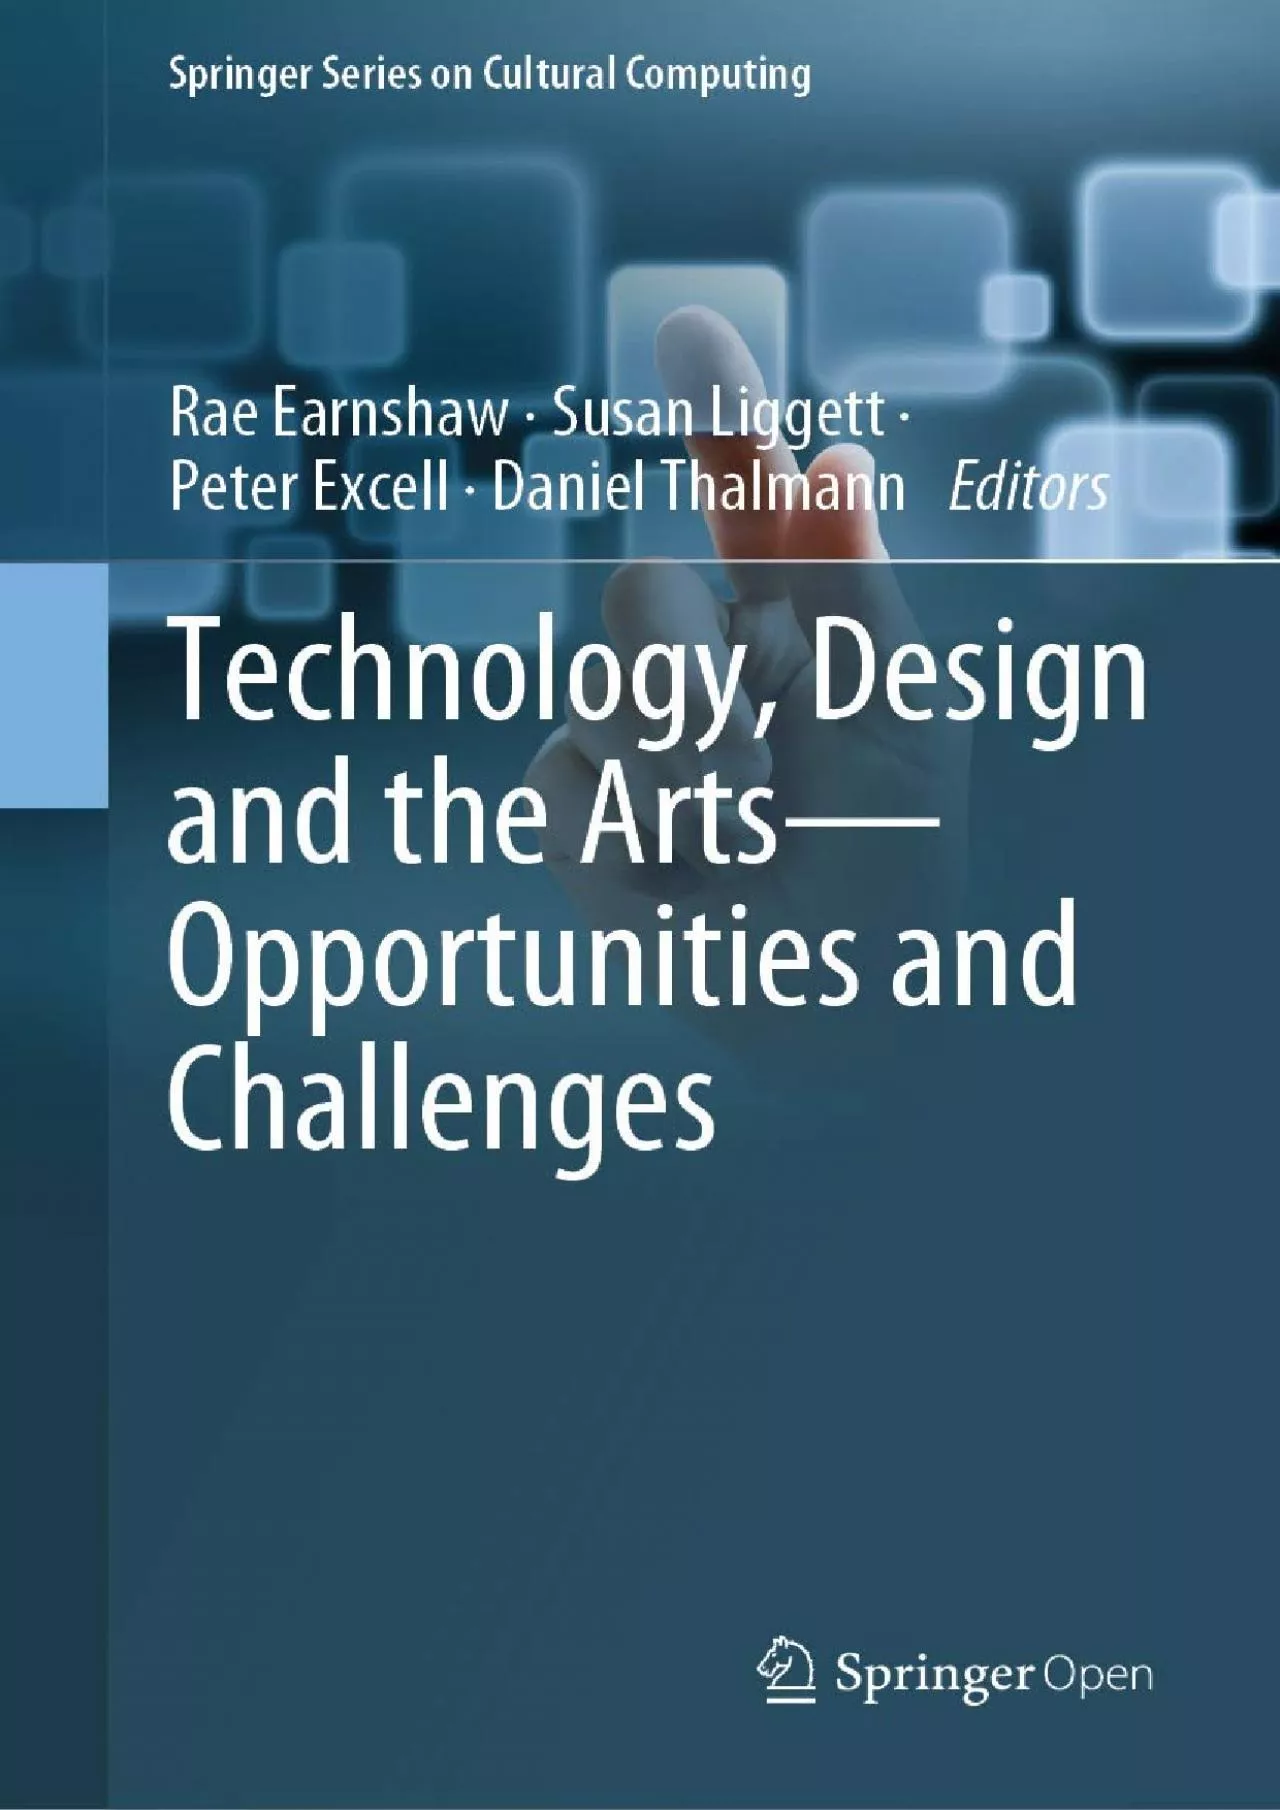 (EBOOK)-Technology Design and the Arts - Opportunities and Challenges (Springer Series